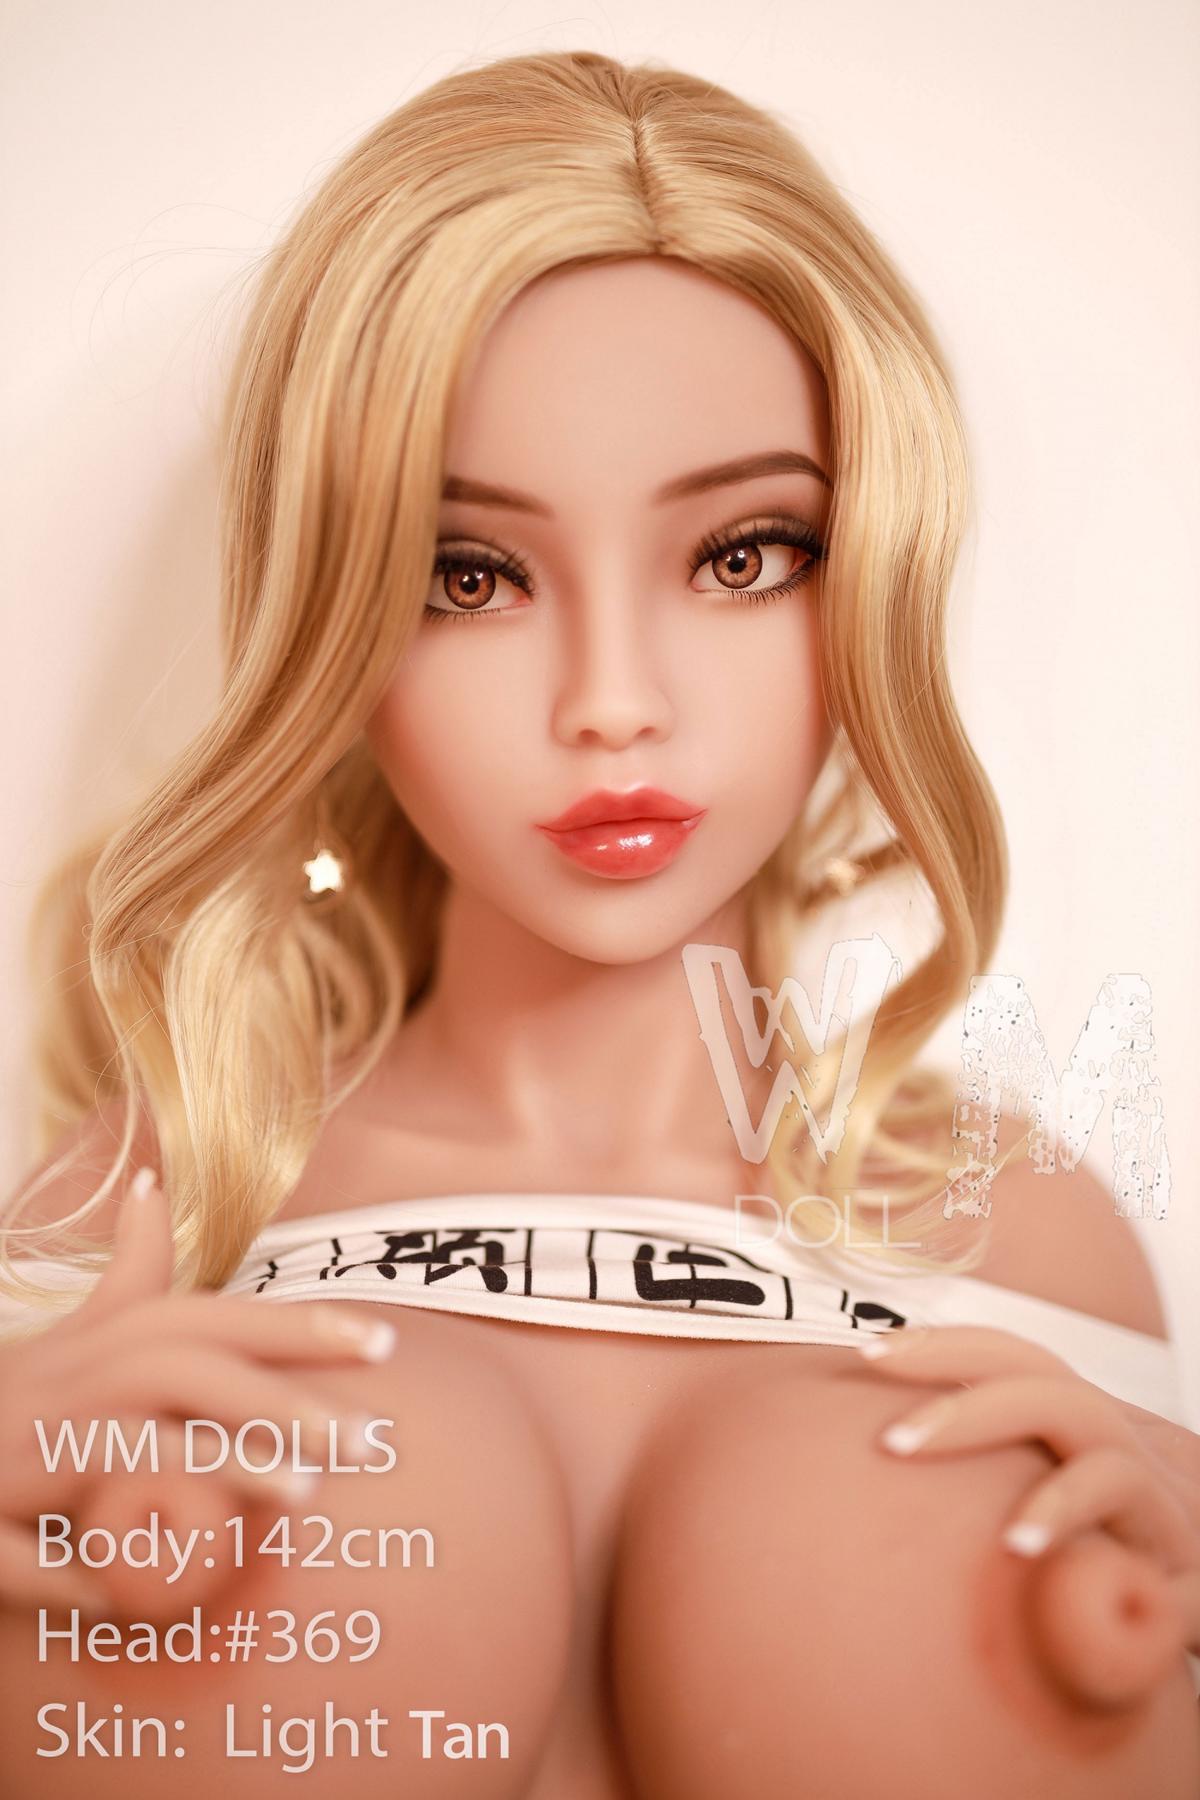 Love doll Clarisse with young appearance and XXL breasts